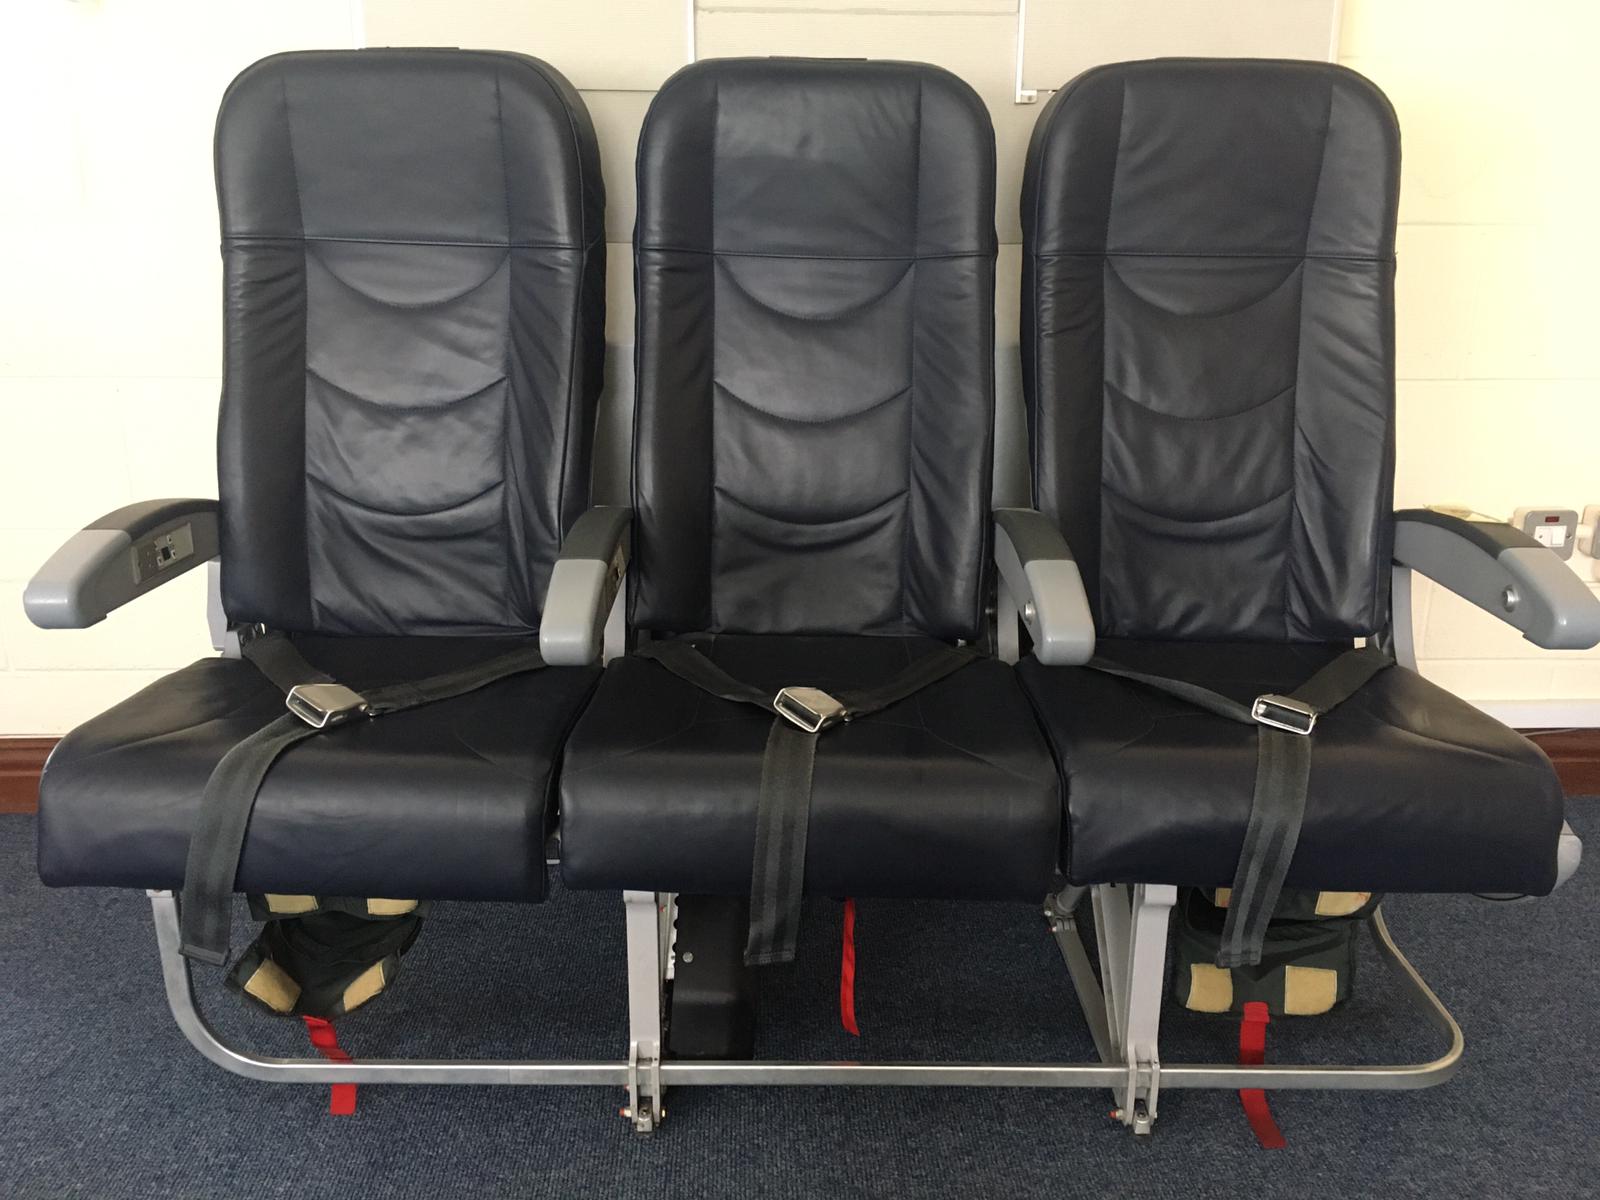 STS Aviation Services Has Aircraft Seats for Sale